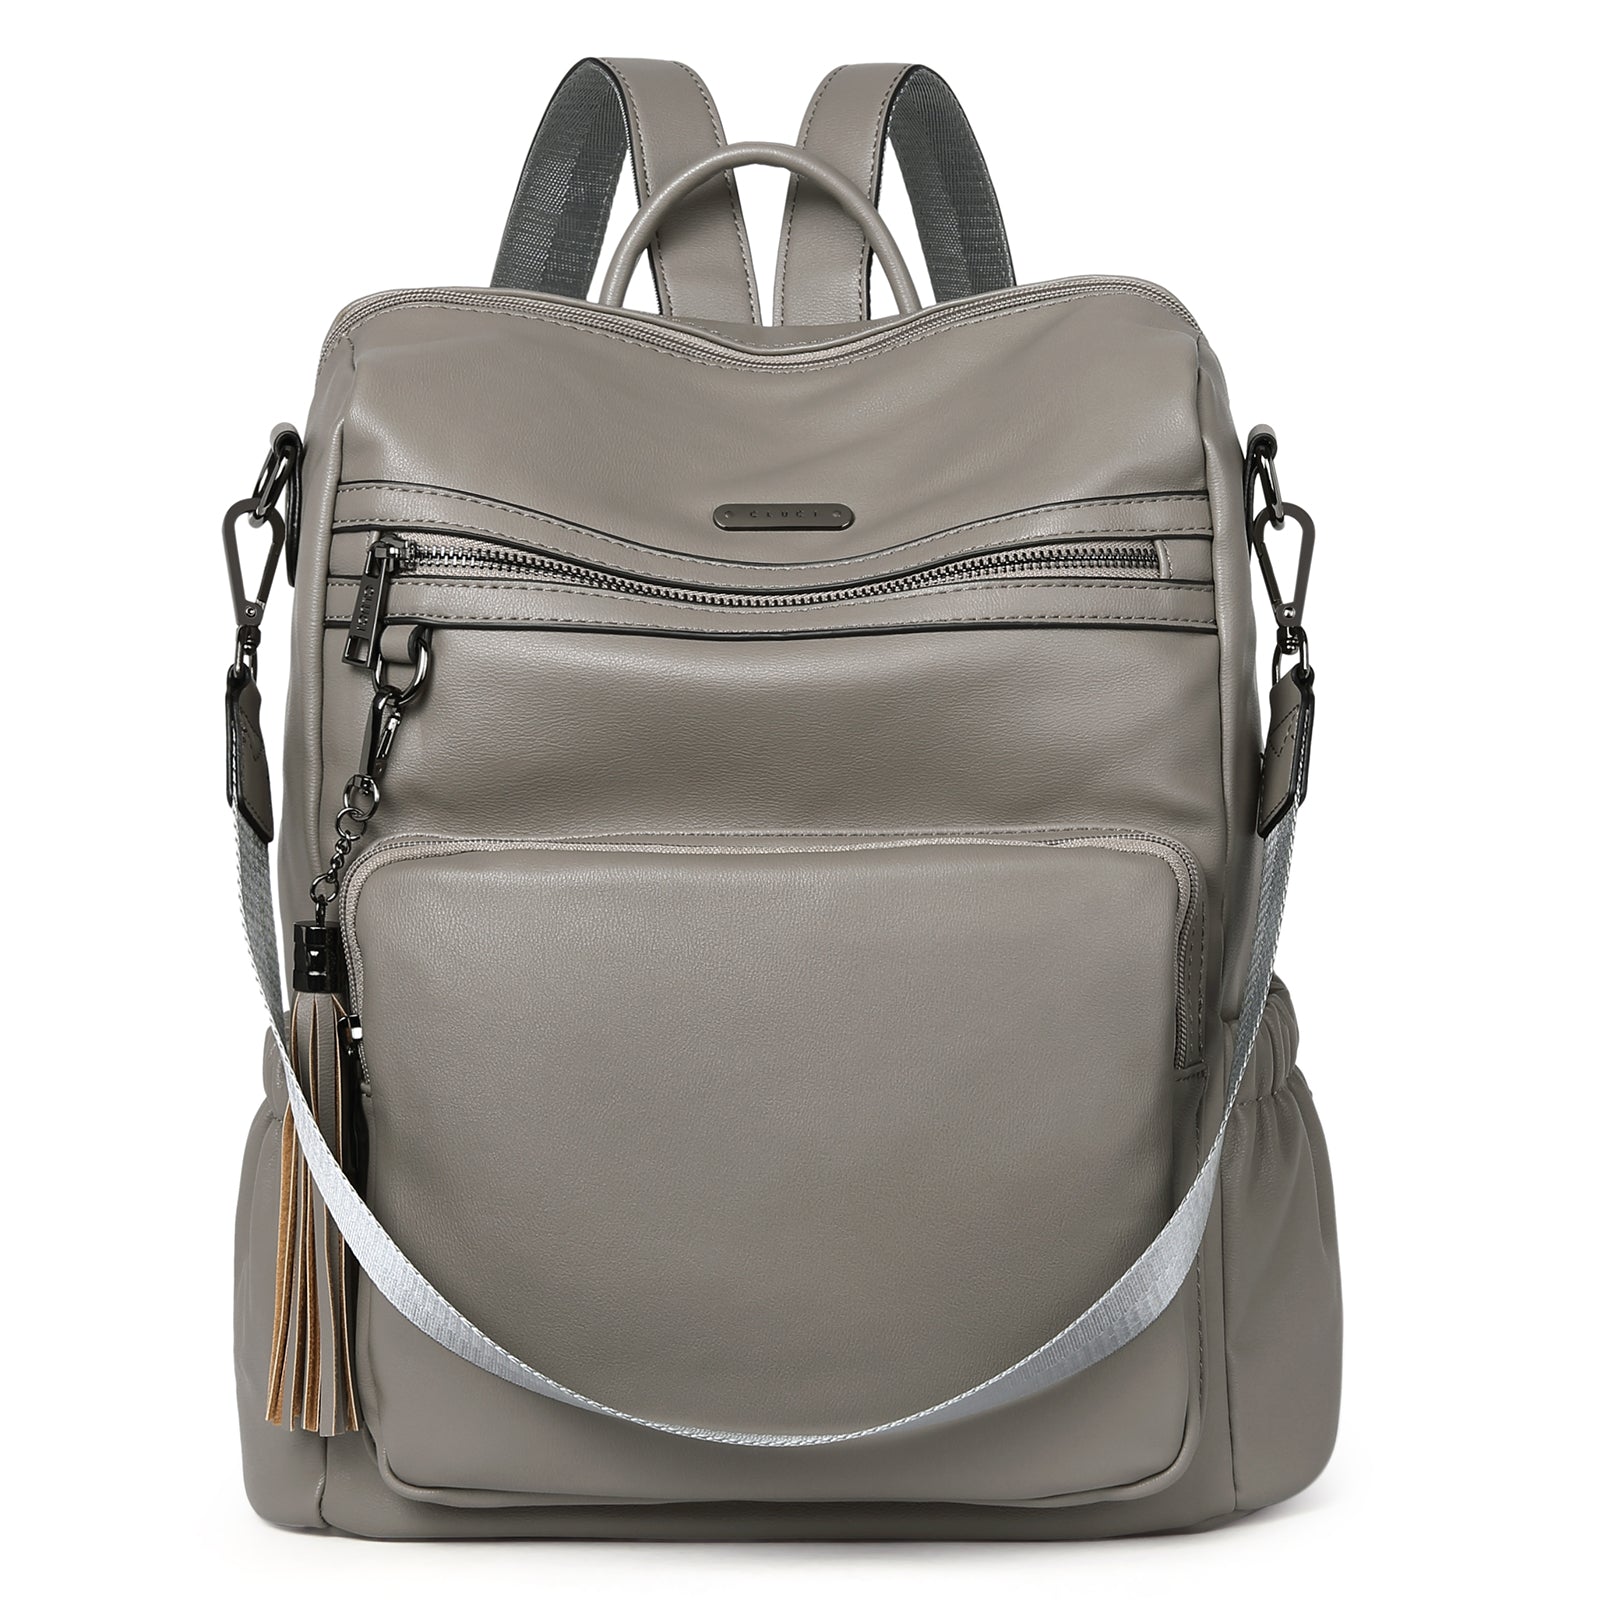  CLUCI Small Backpack for Women Leather Women's